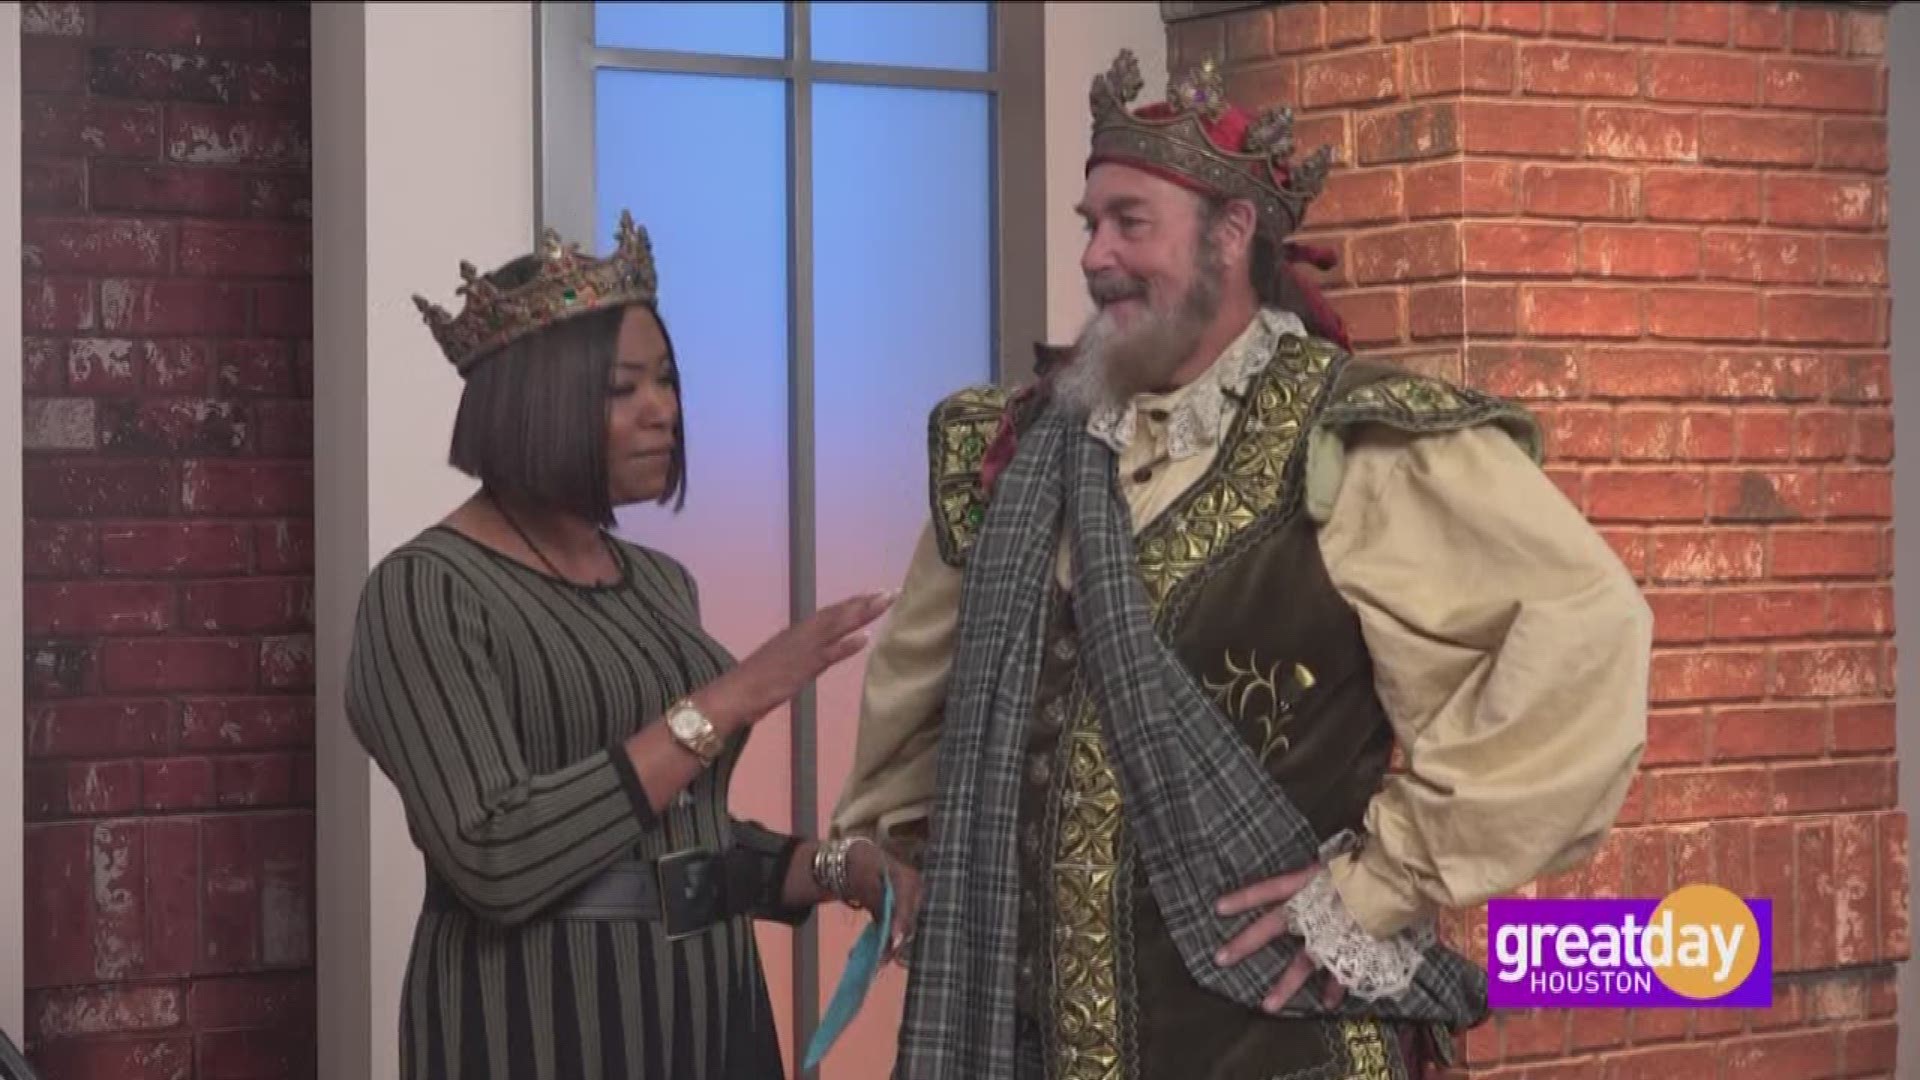 Texas Renaissance Festival is celebrating big this year in honor of its 45th anniversary, and the King dropped by to tell us about the festival's final weekend.